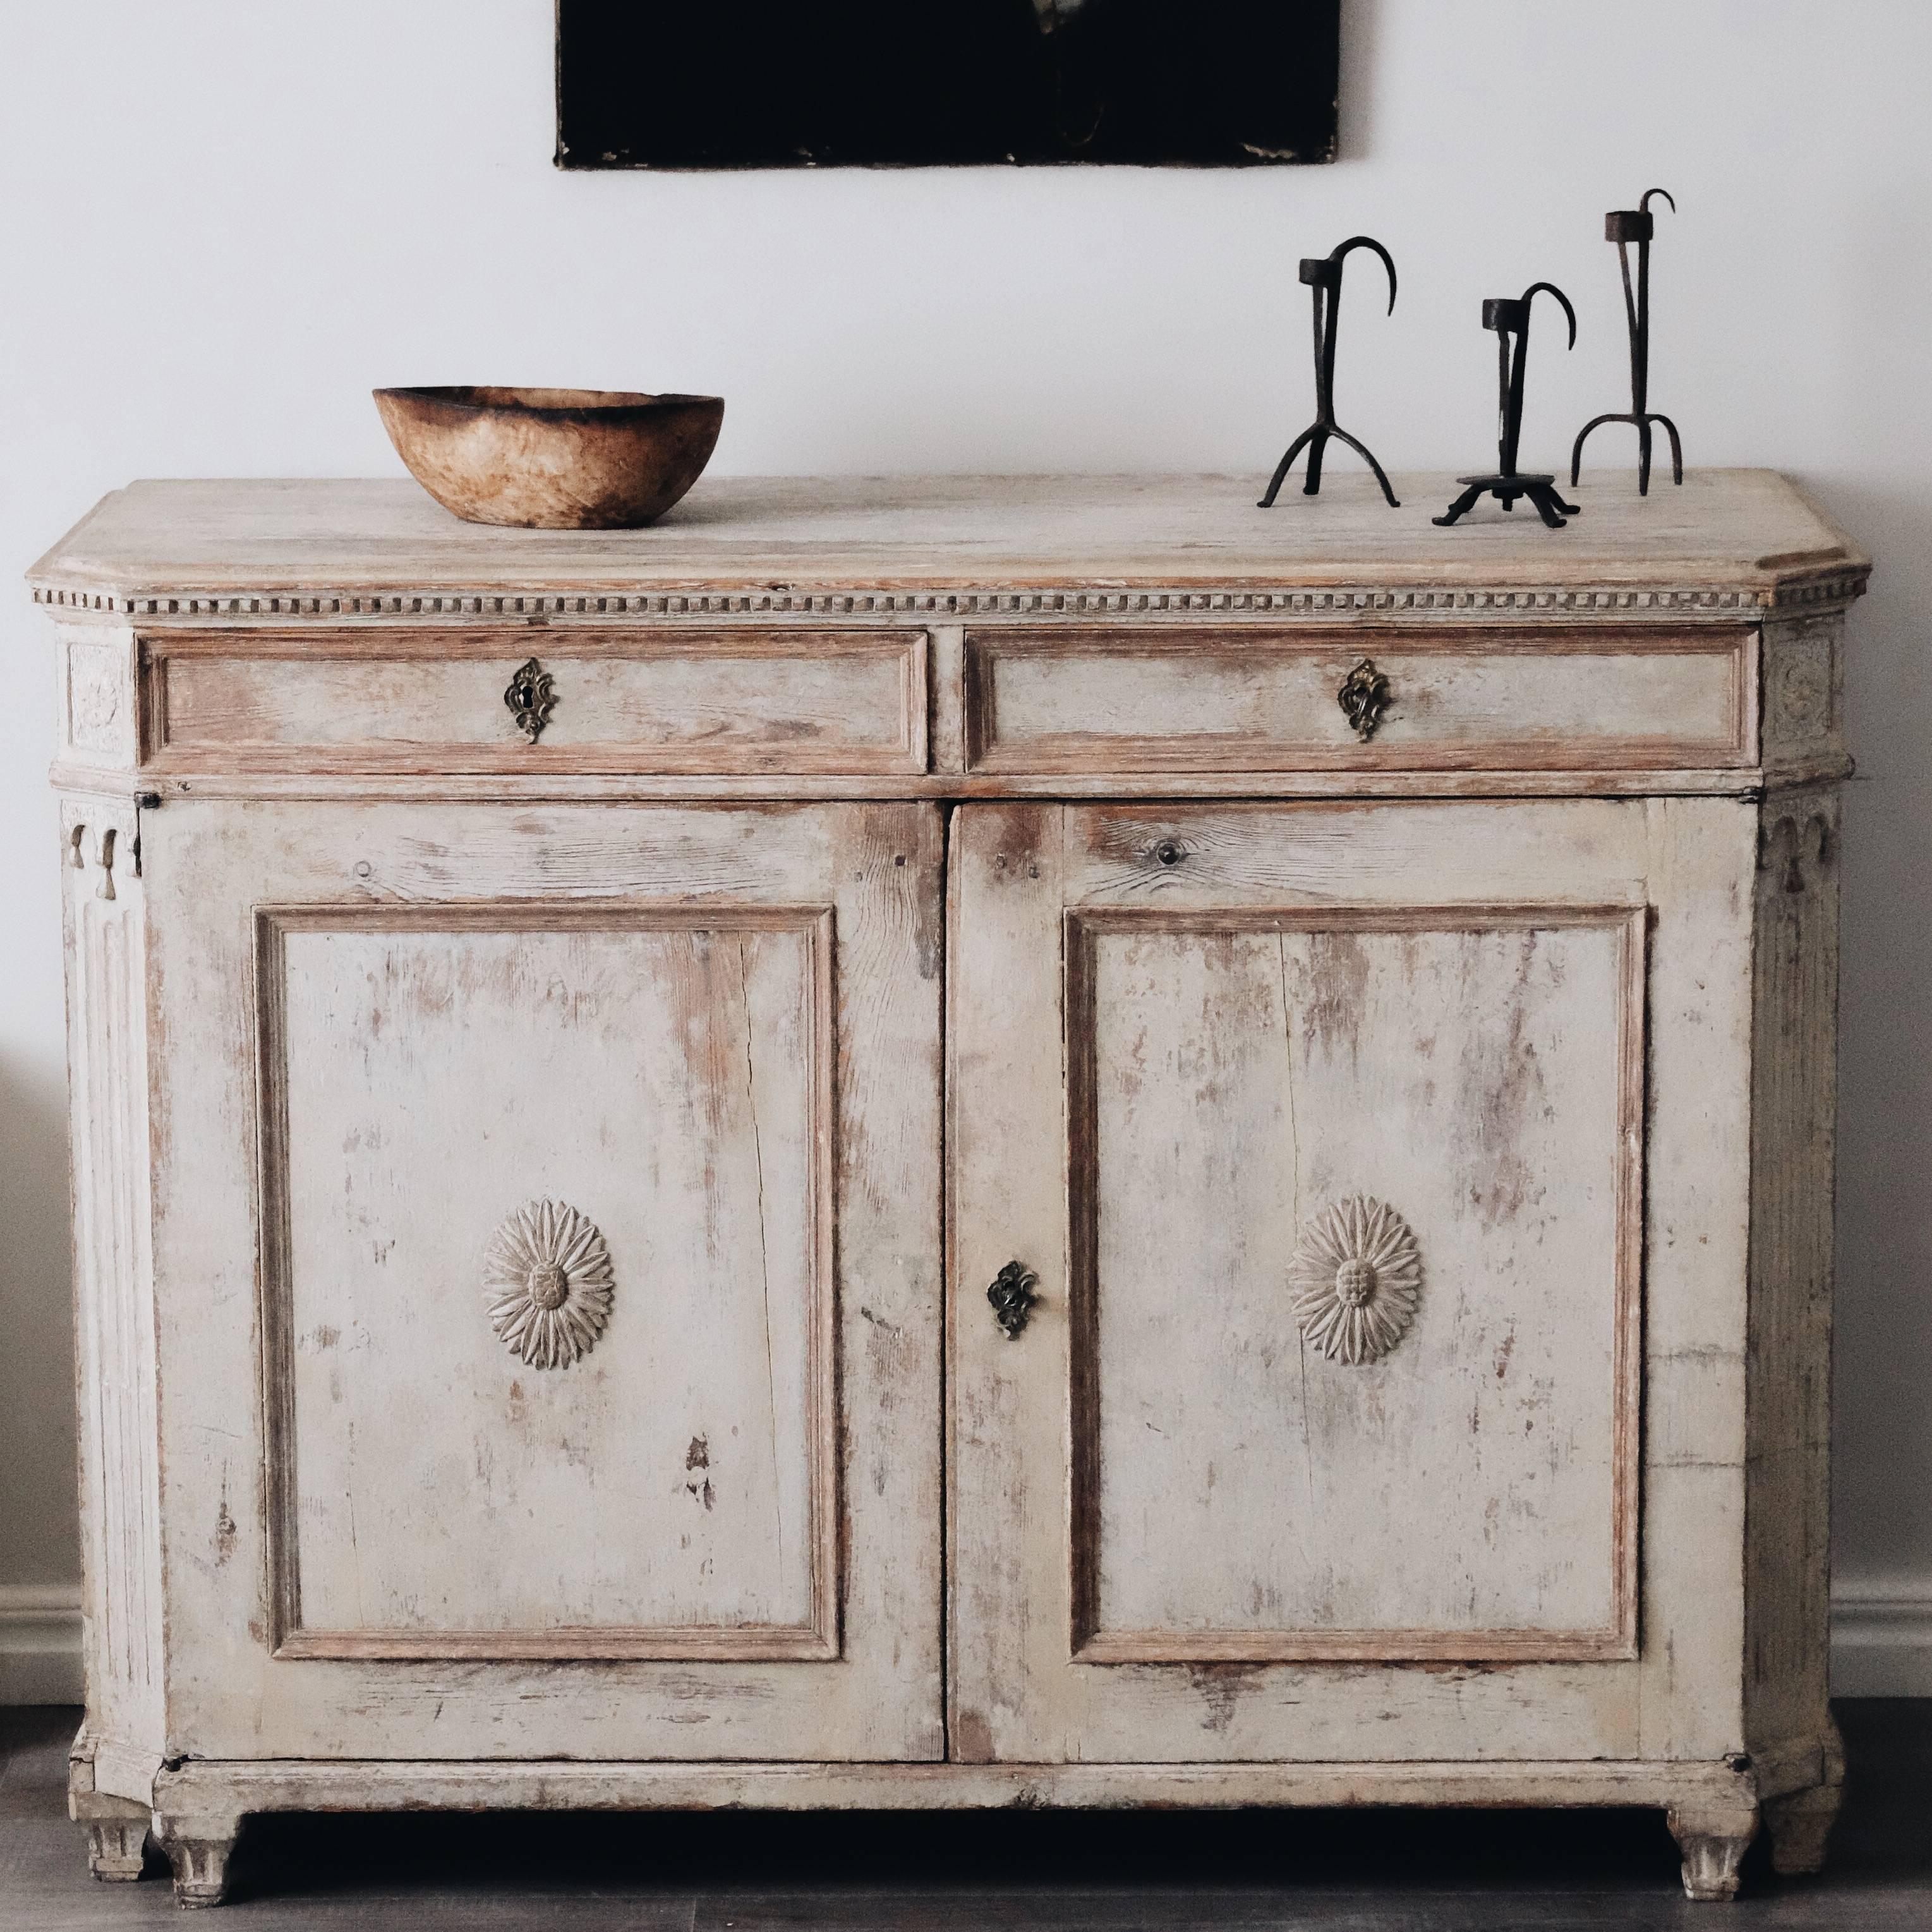 Fine 19th century Gustavian buffet or sideboard in original color. 

Condition: Good.
Wear: Wear consistent with age and use.
Finish: Dry scraped to original color.
Hardware: Original.
Year: circa 1800.